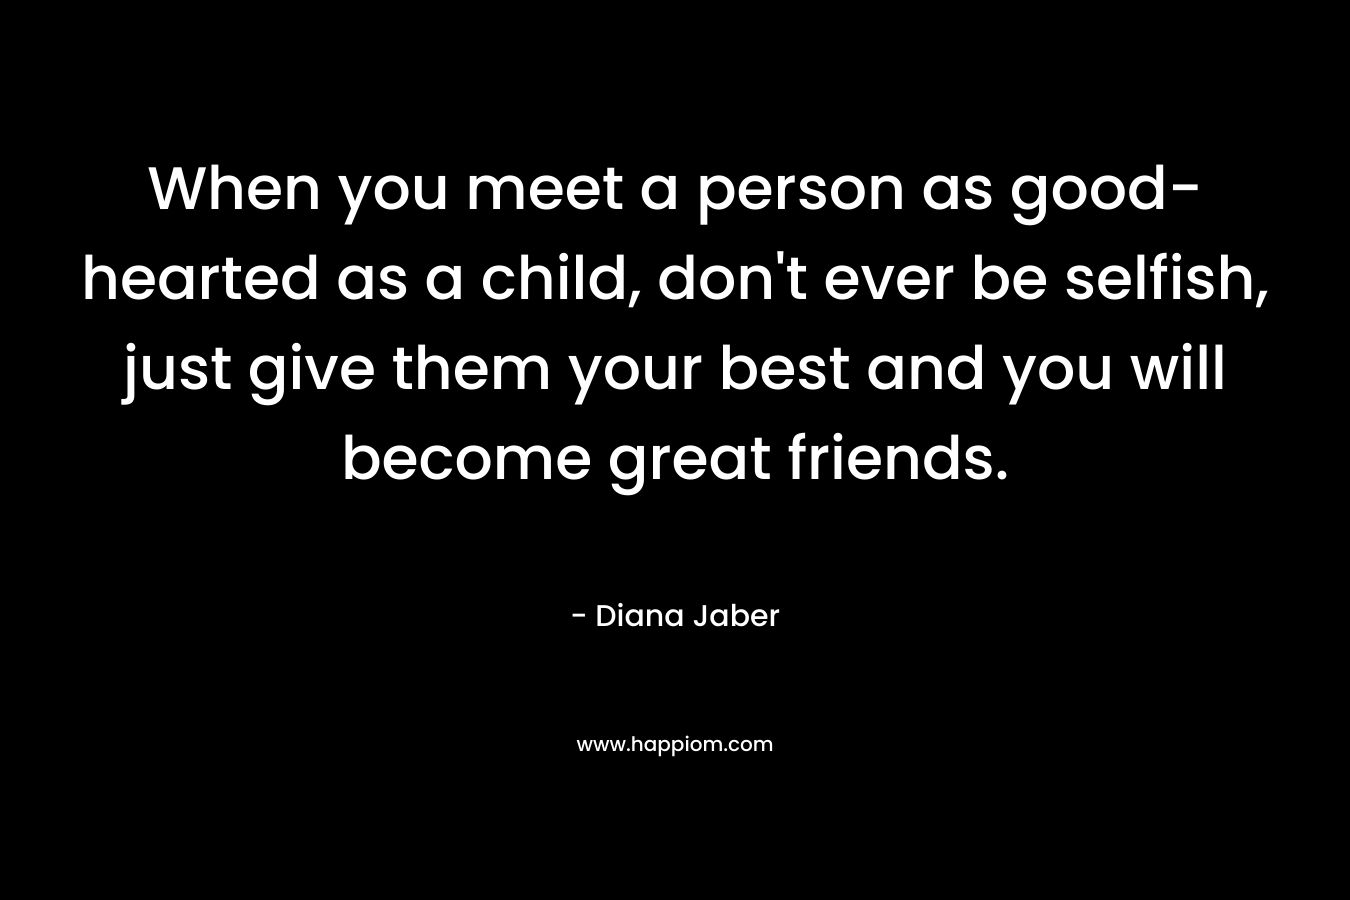 When you meet a person as good-hearted as a child, don’t ever be selfish, just give them your best and you will become great friends. – Diana Jaber